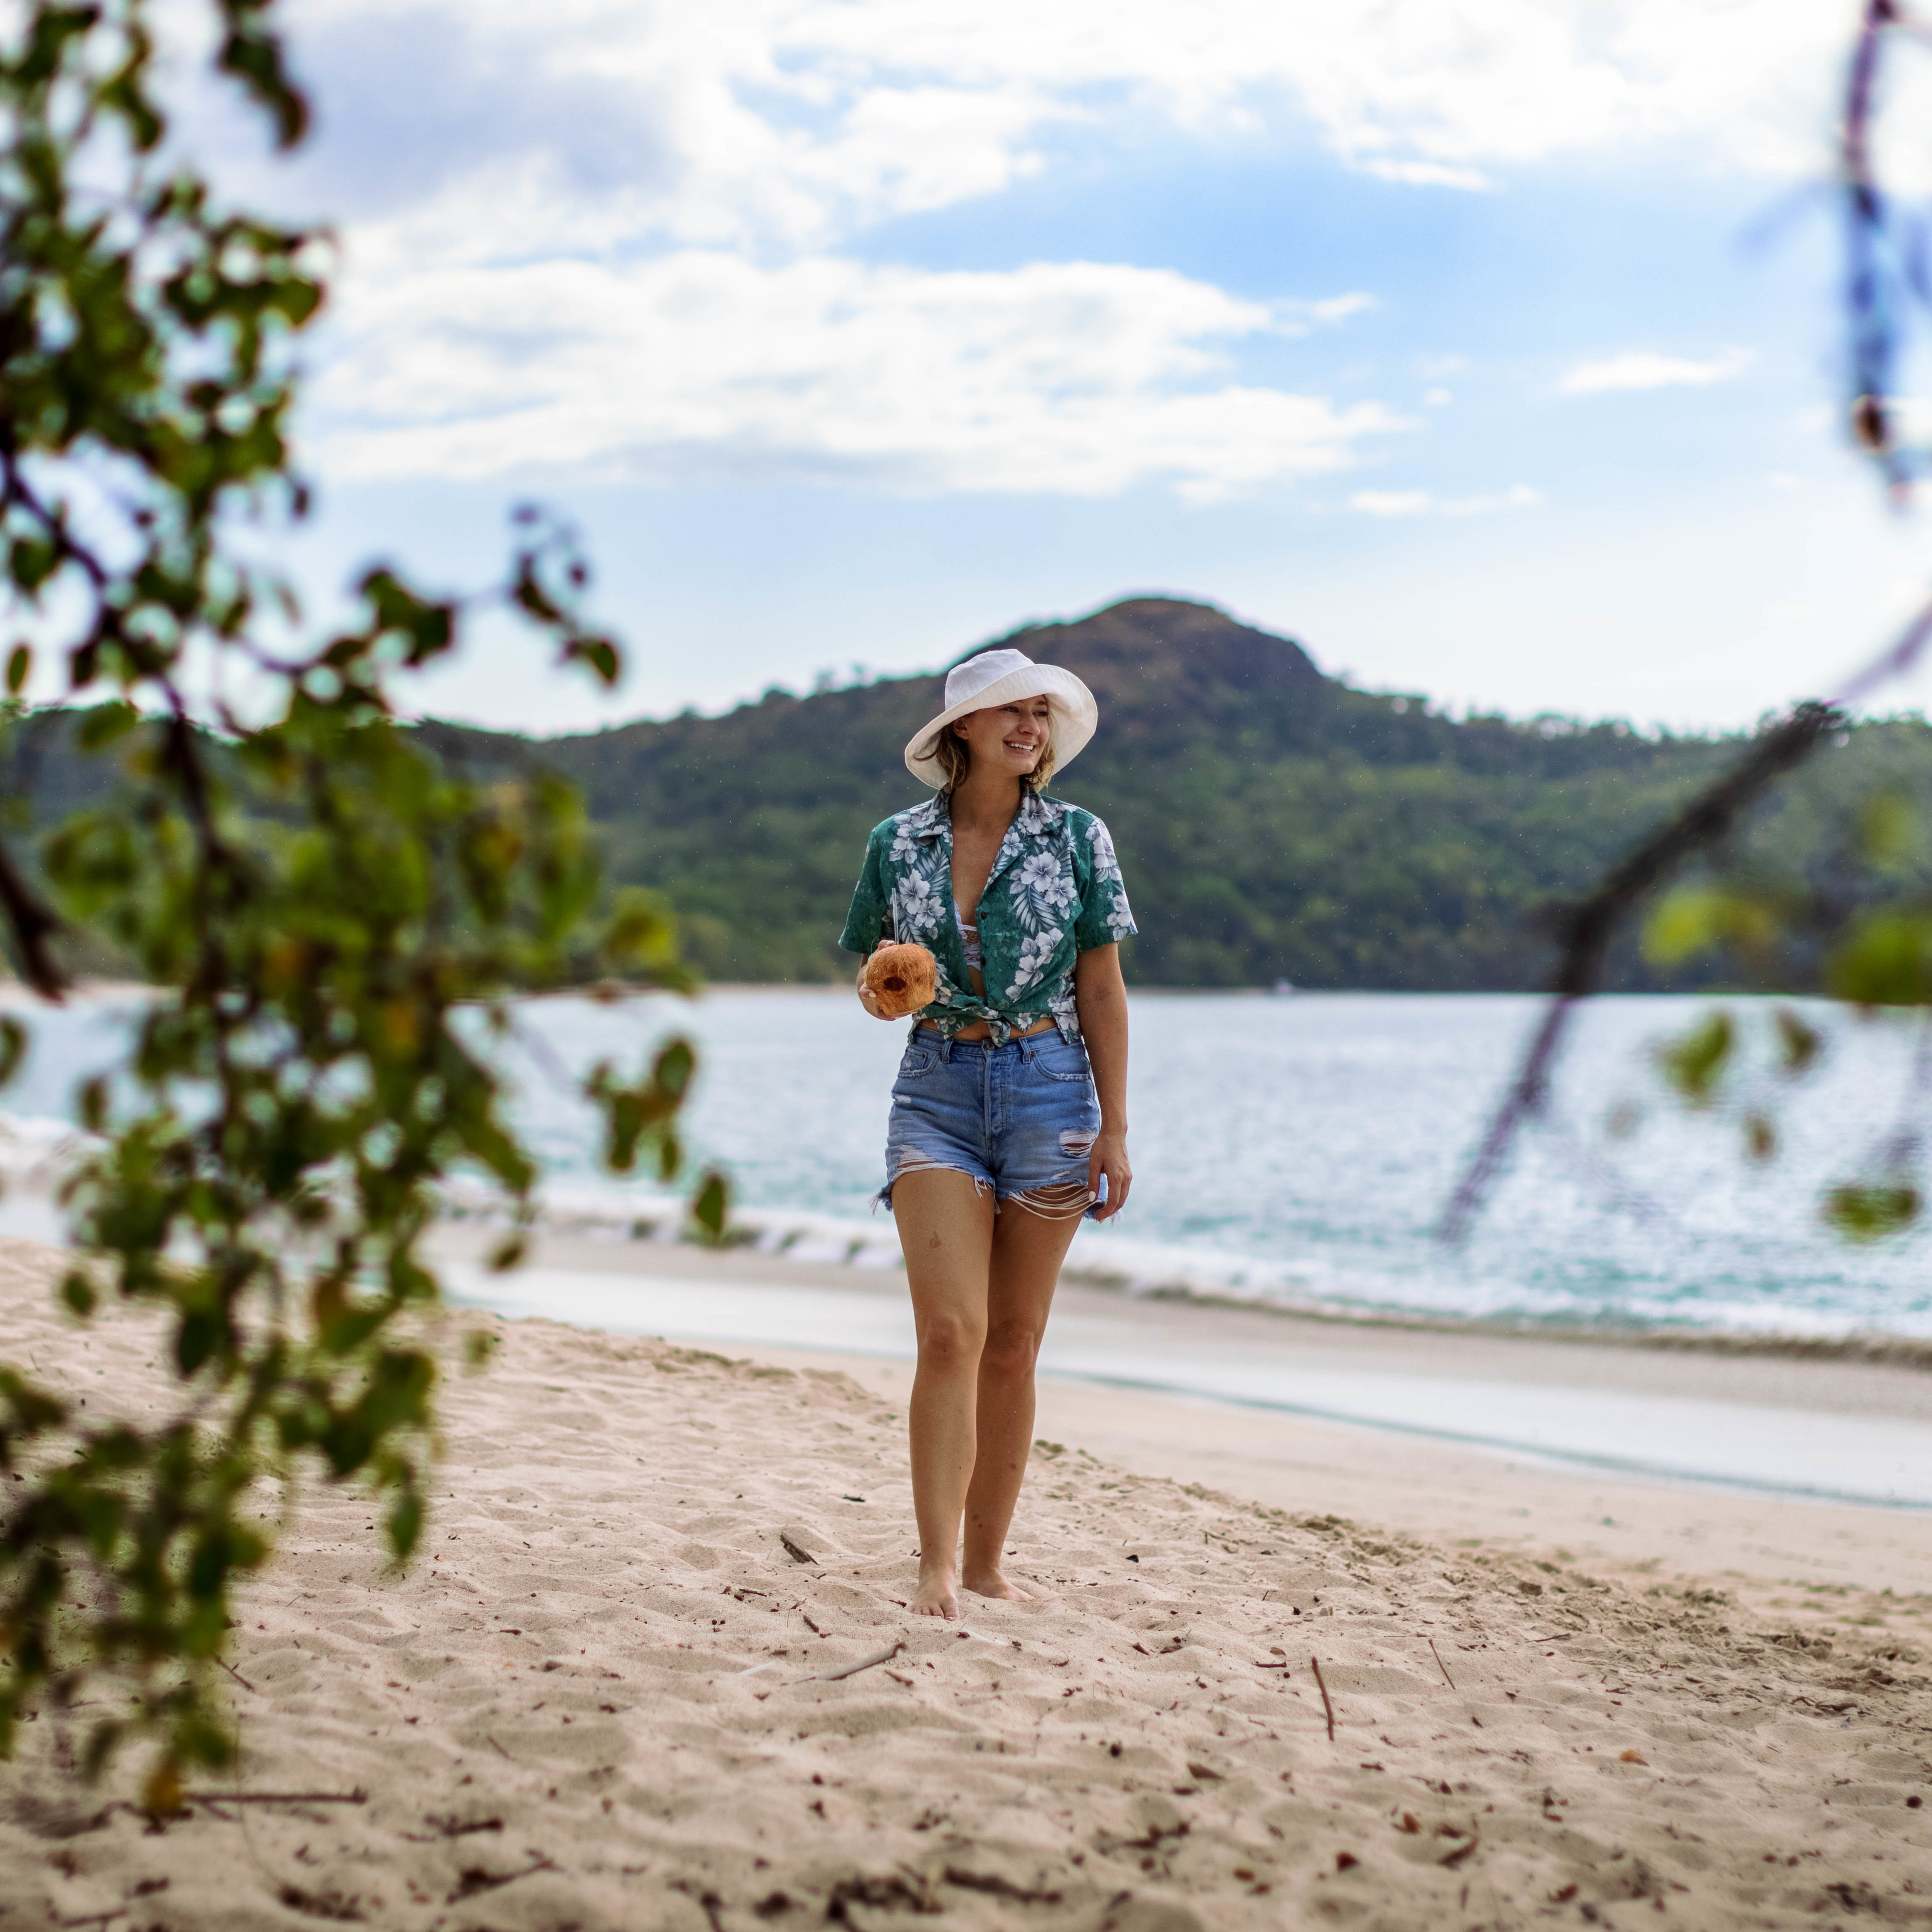 Costa Rica Beach Outfit Lookbook - One Girl Wandering